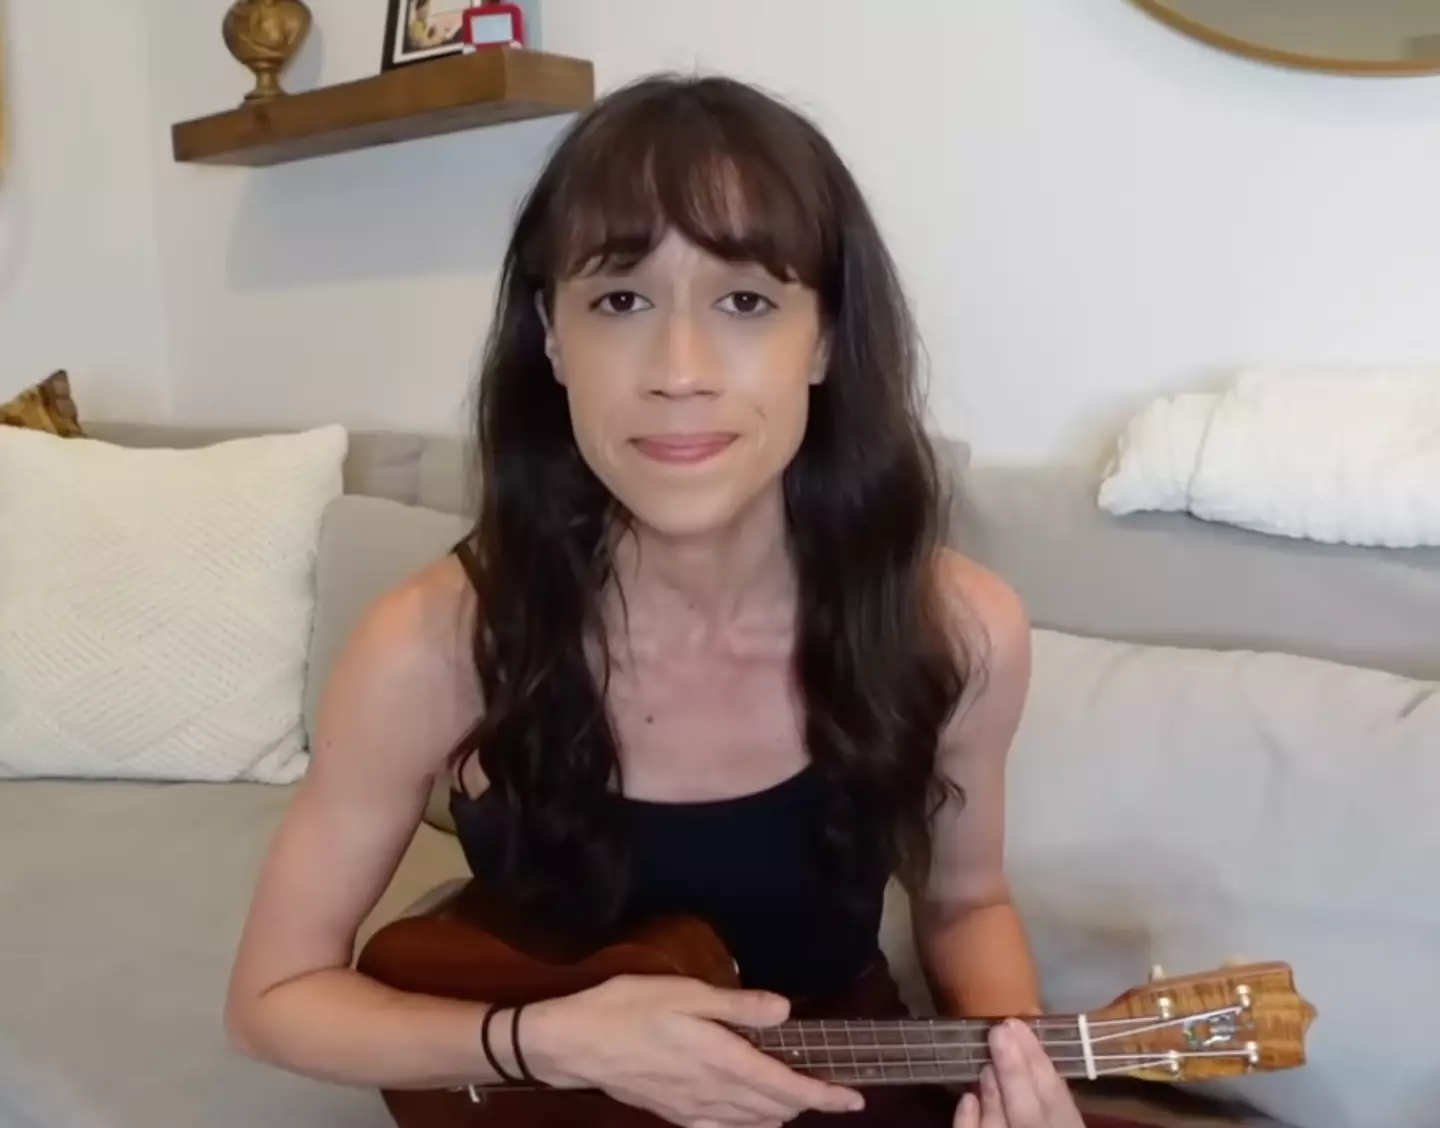 Colleen Ballinger responded to the allegations while playing a ukulele.